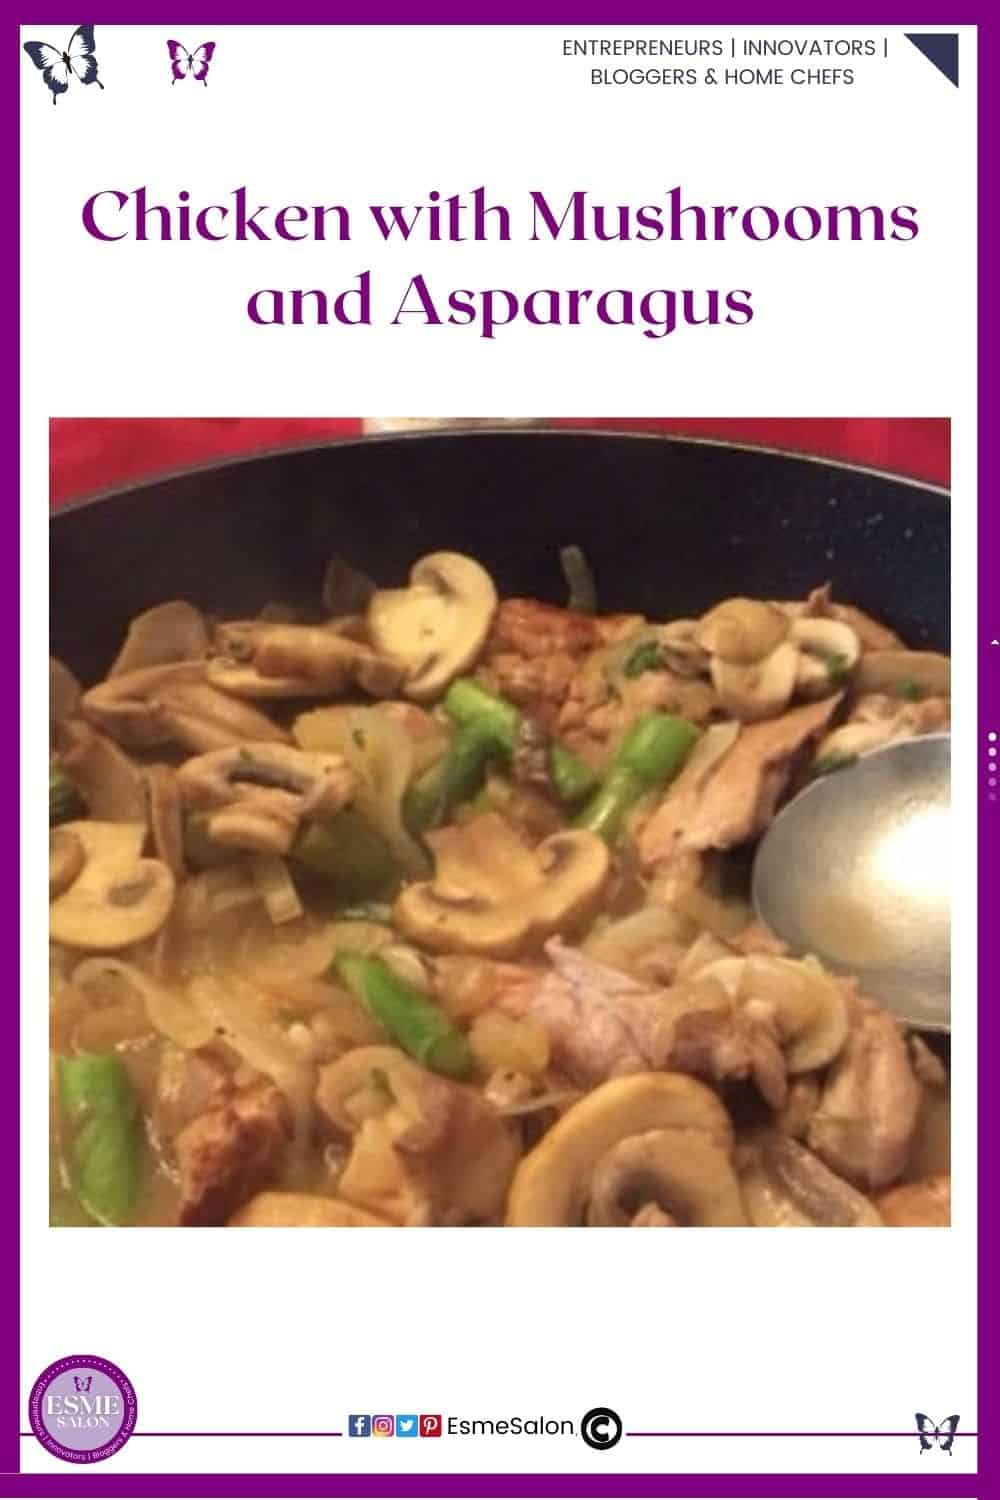 an image of a pan filled with delicious Chicken with Mushrooms and Asparagus in a rich sauce